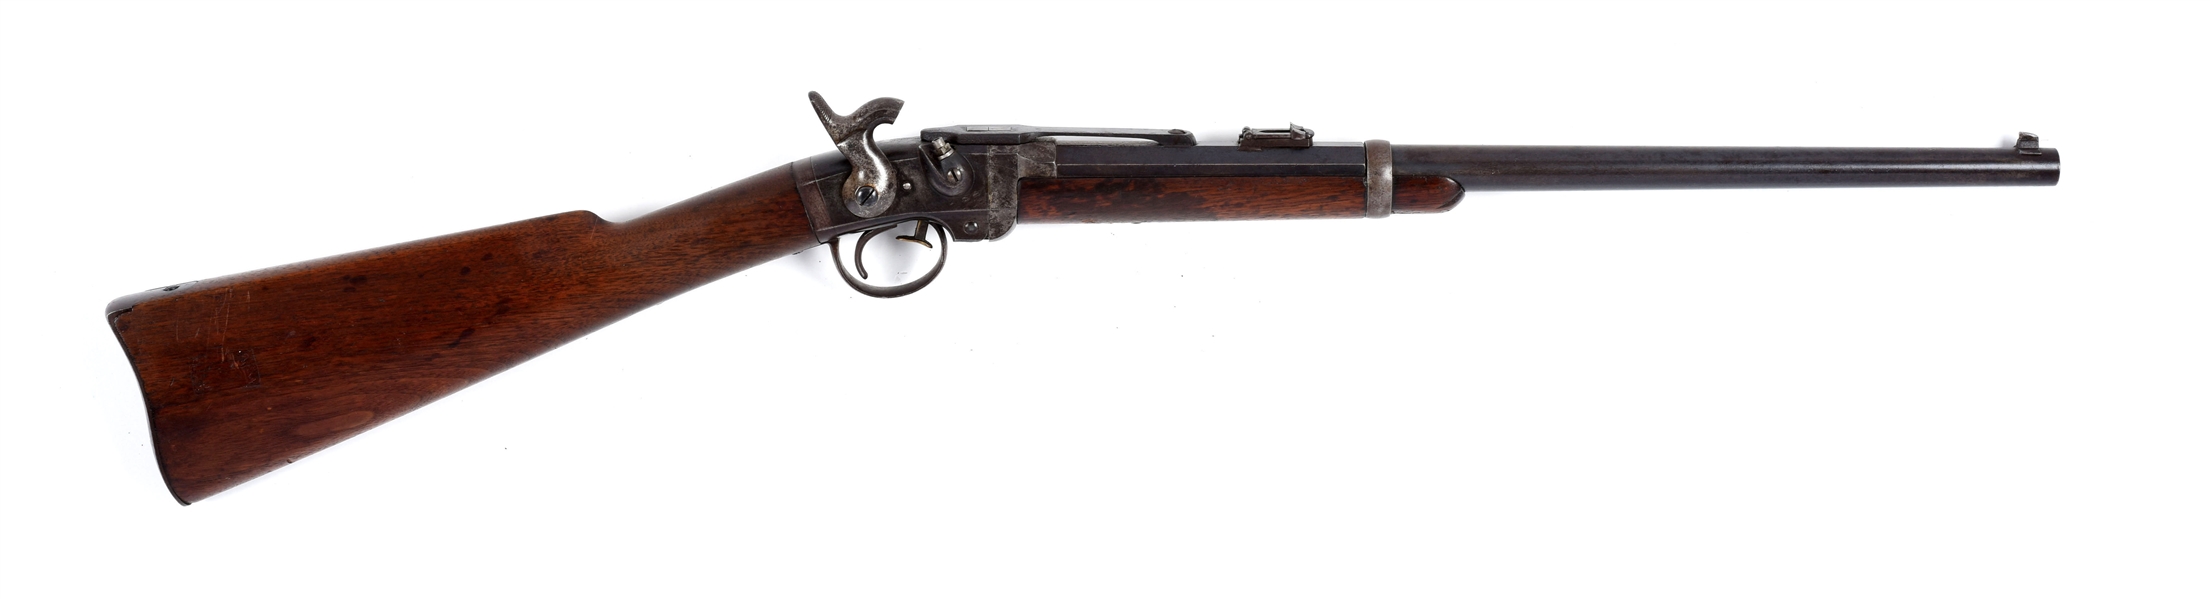 (A) MASS ARMS SMITH CARBINE PERCUSSION RIFLE.